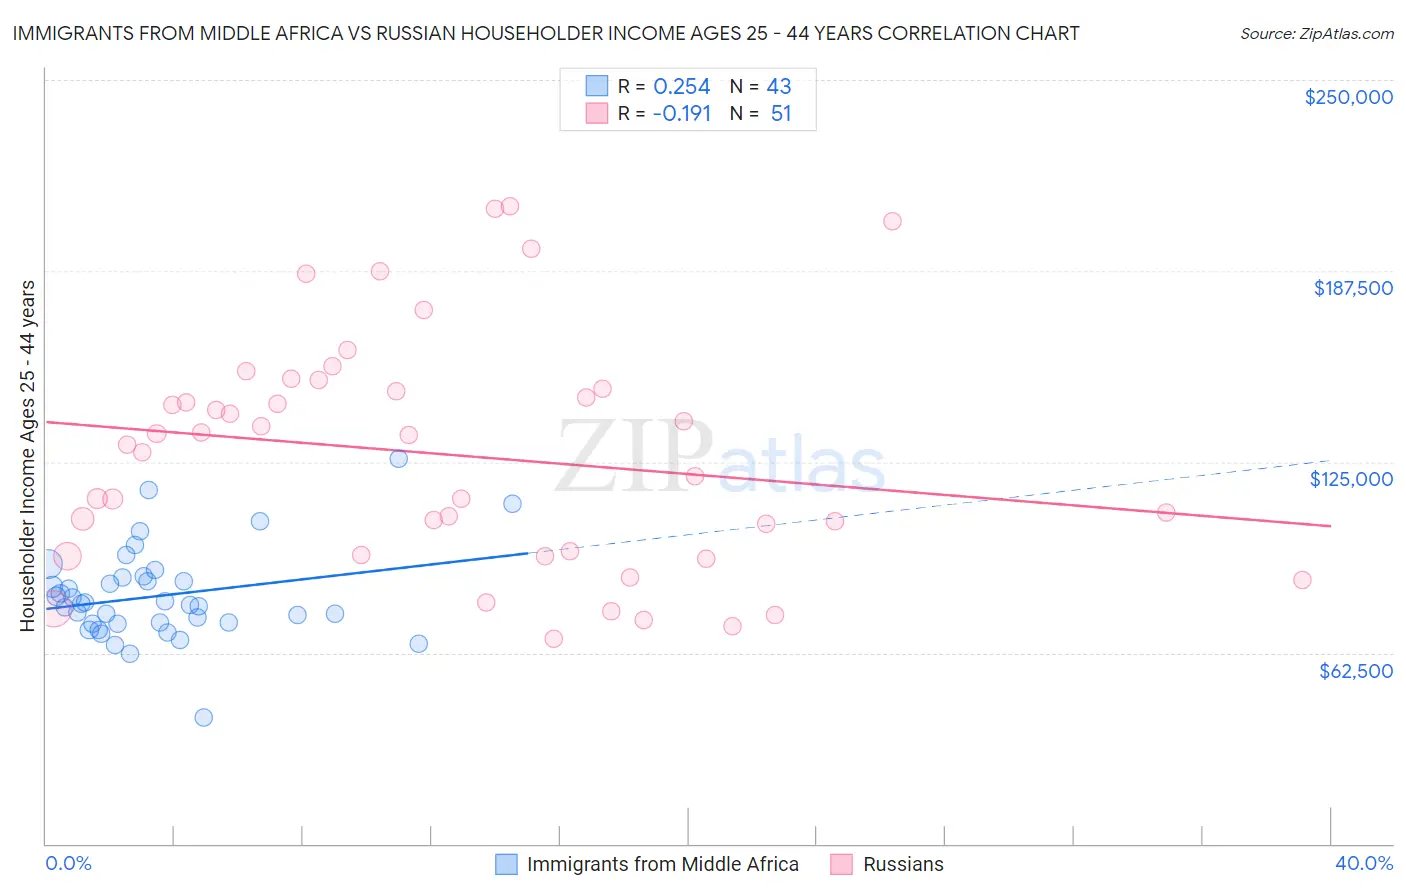 Immigrants from Middle Africa vs Russian Householder Income Ages 25 - 44 years